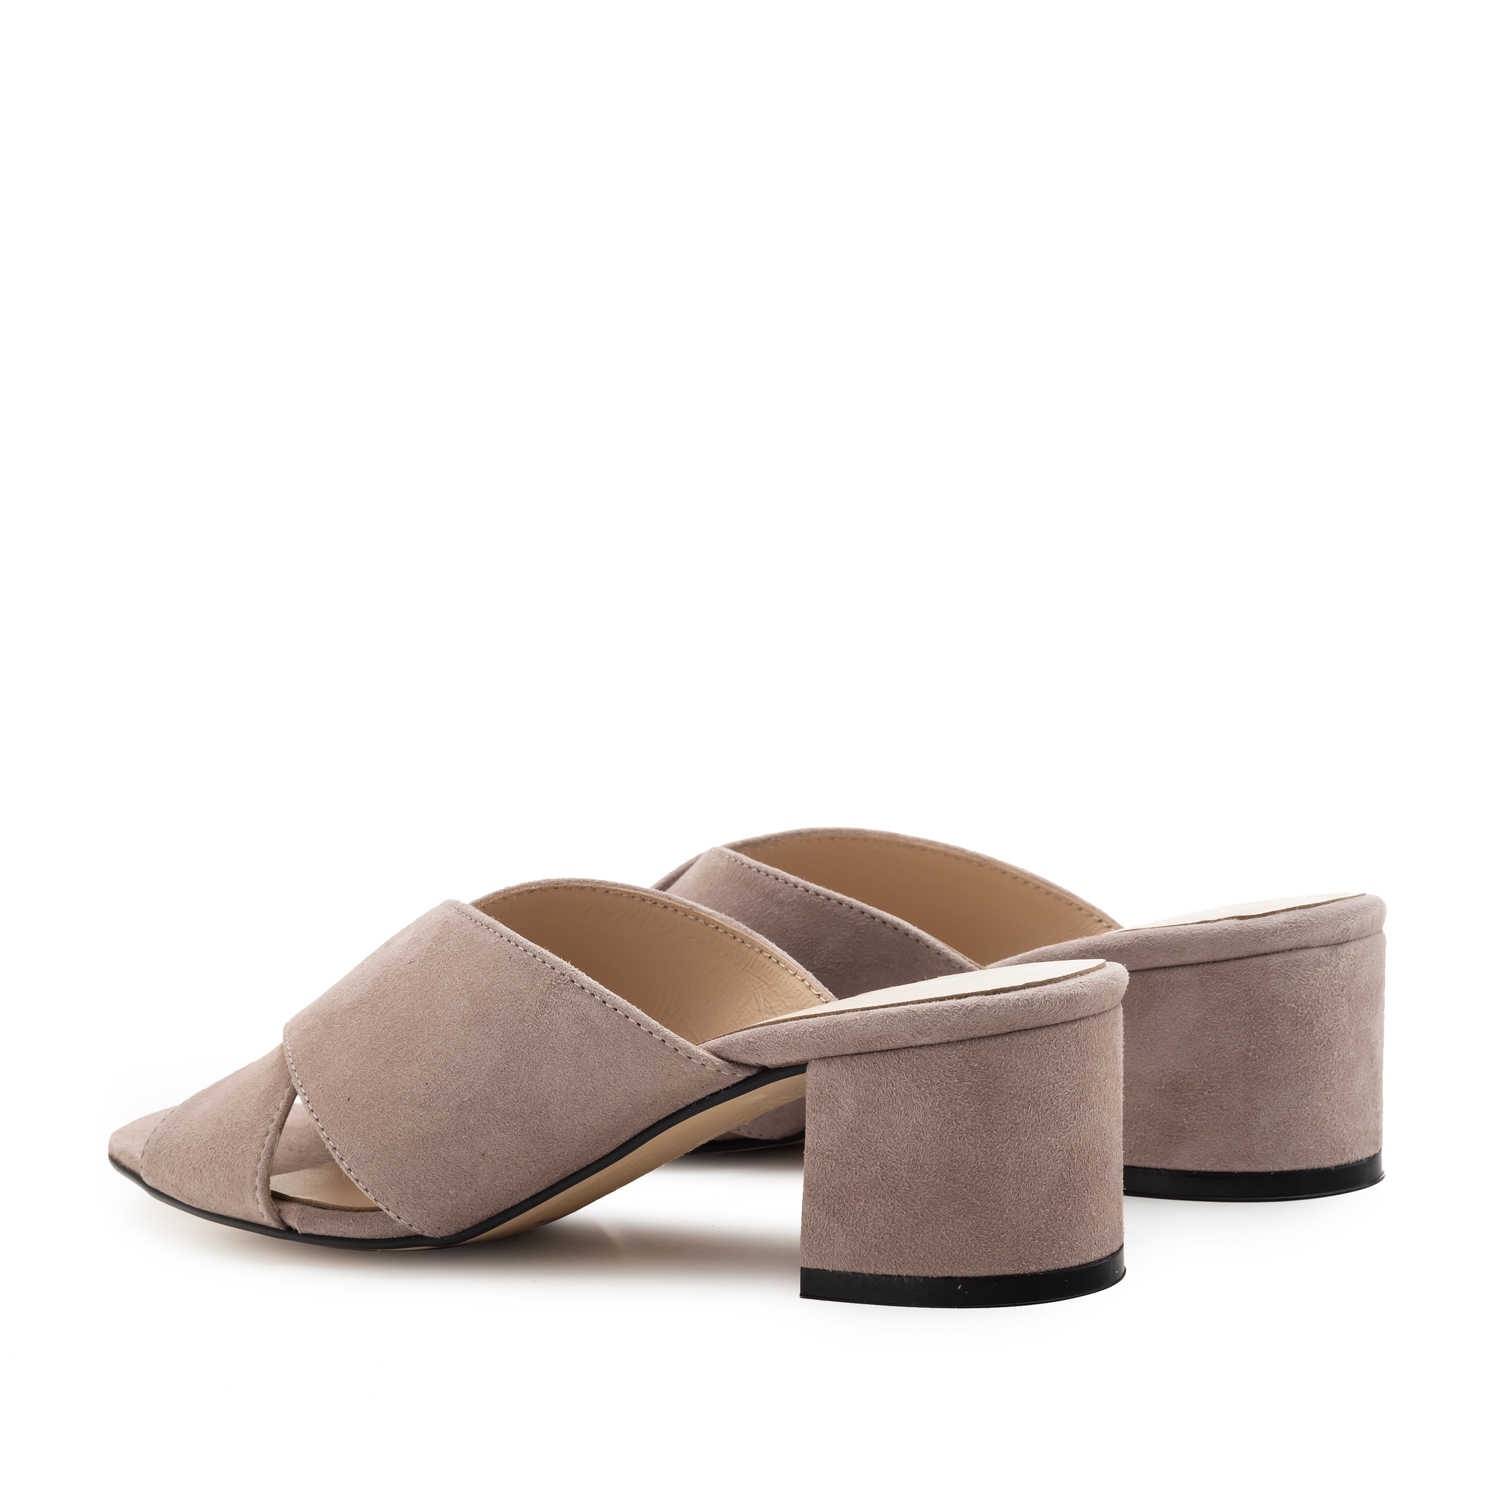 Crossover Mules in Nude Suede Leather 